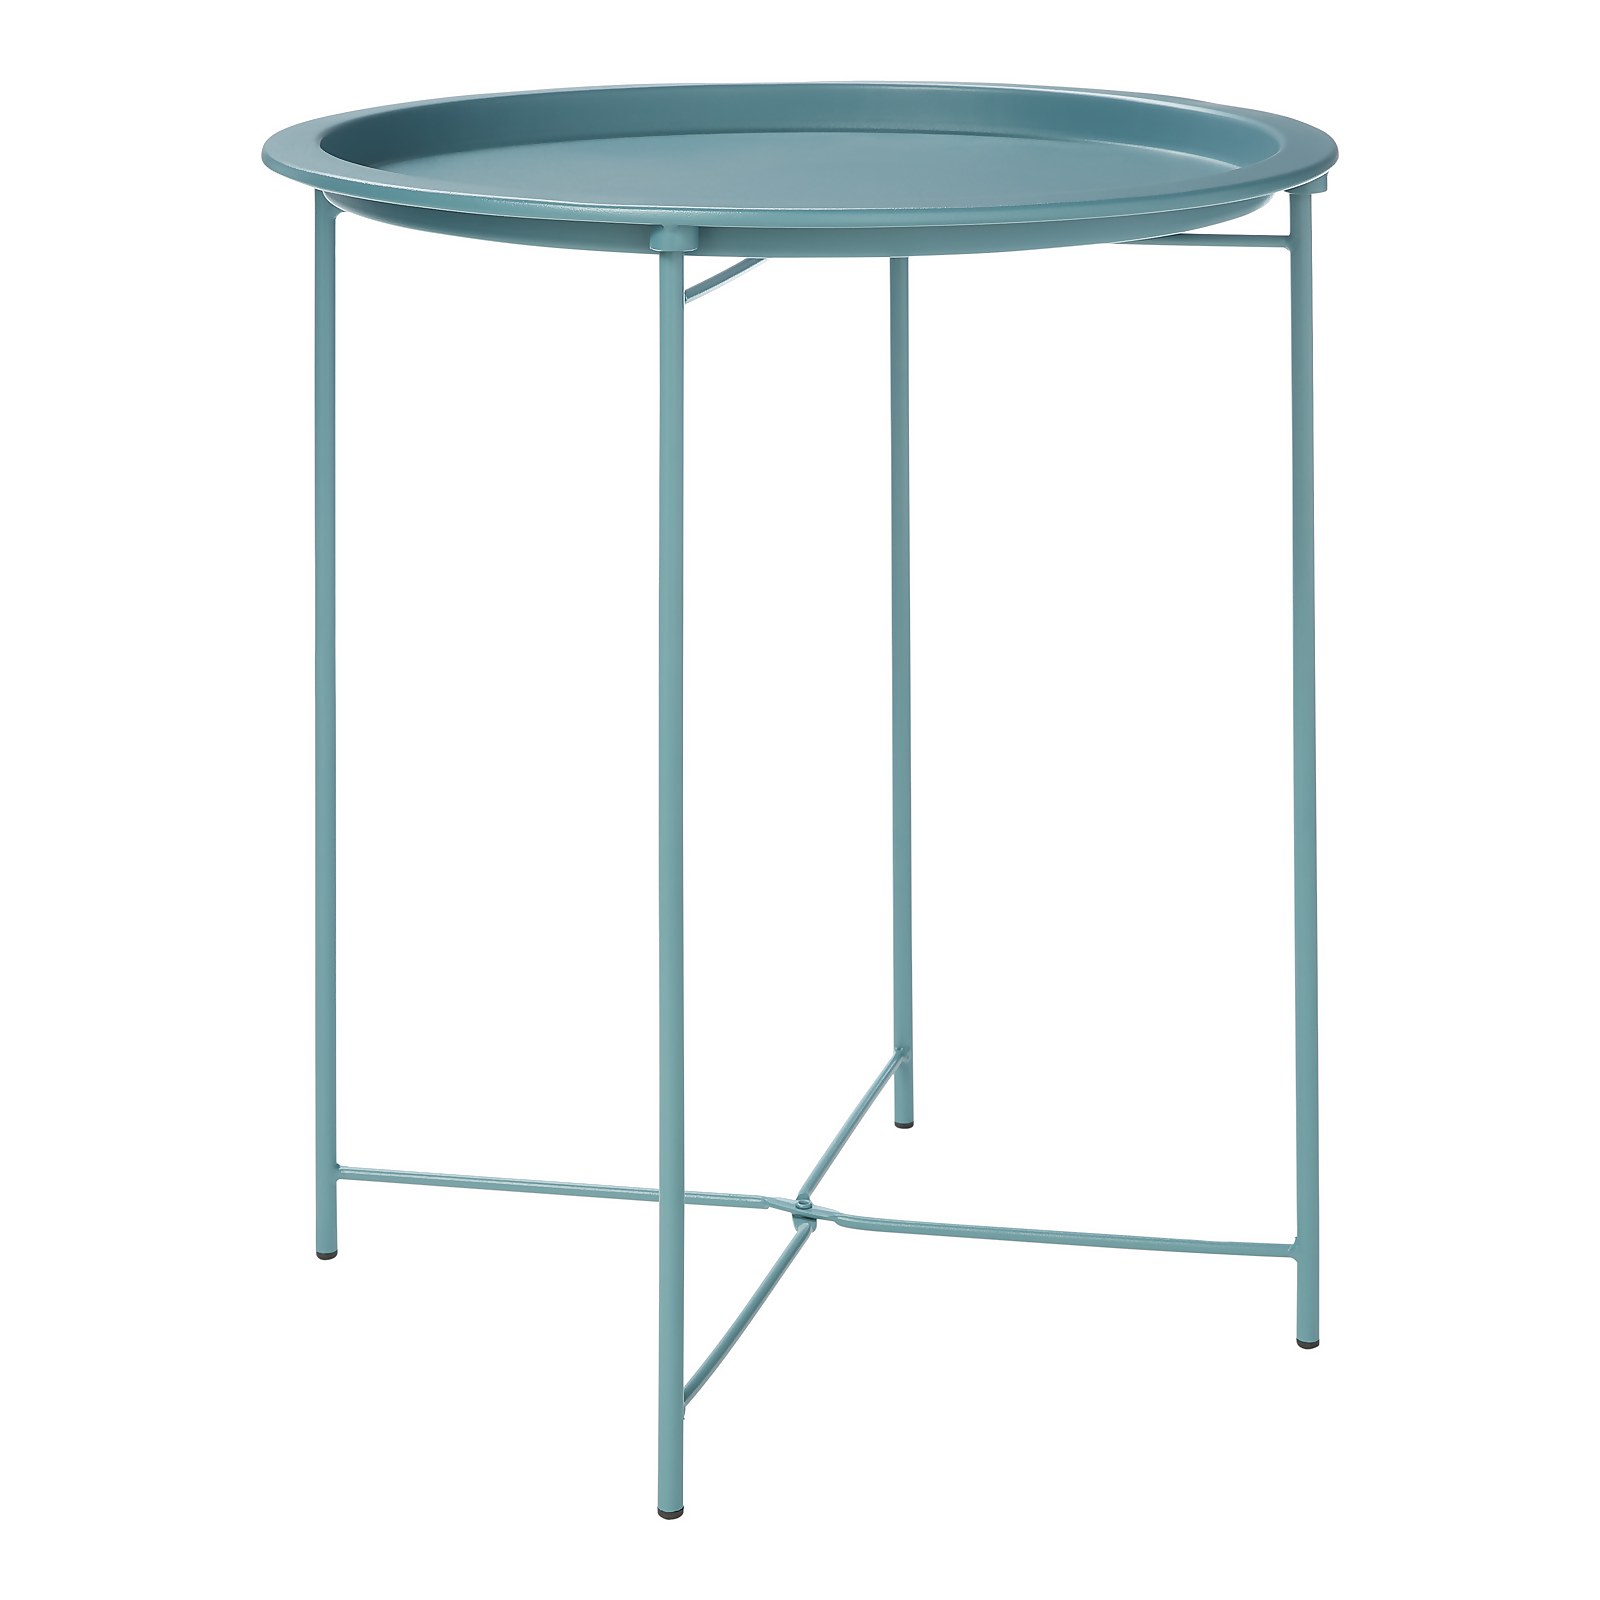 Photo of Folding Side Table Dark Teal